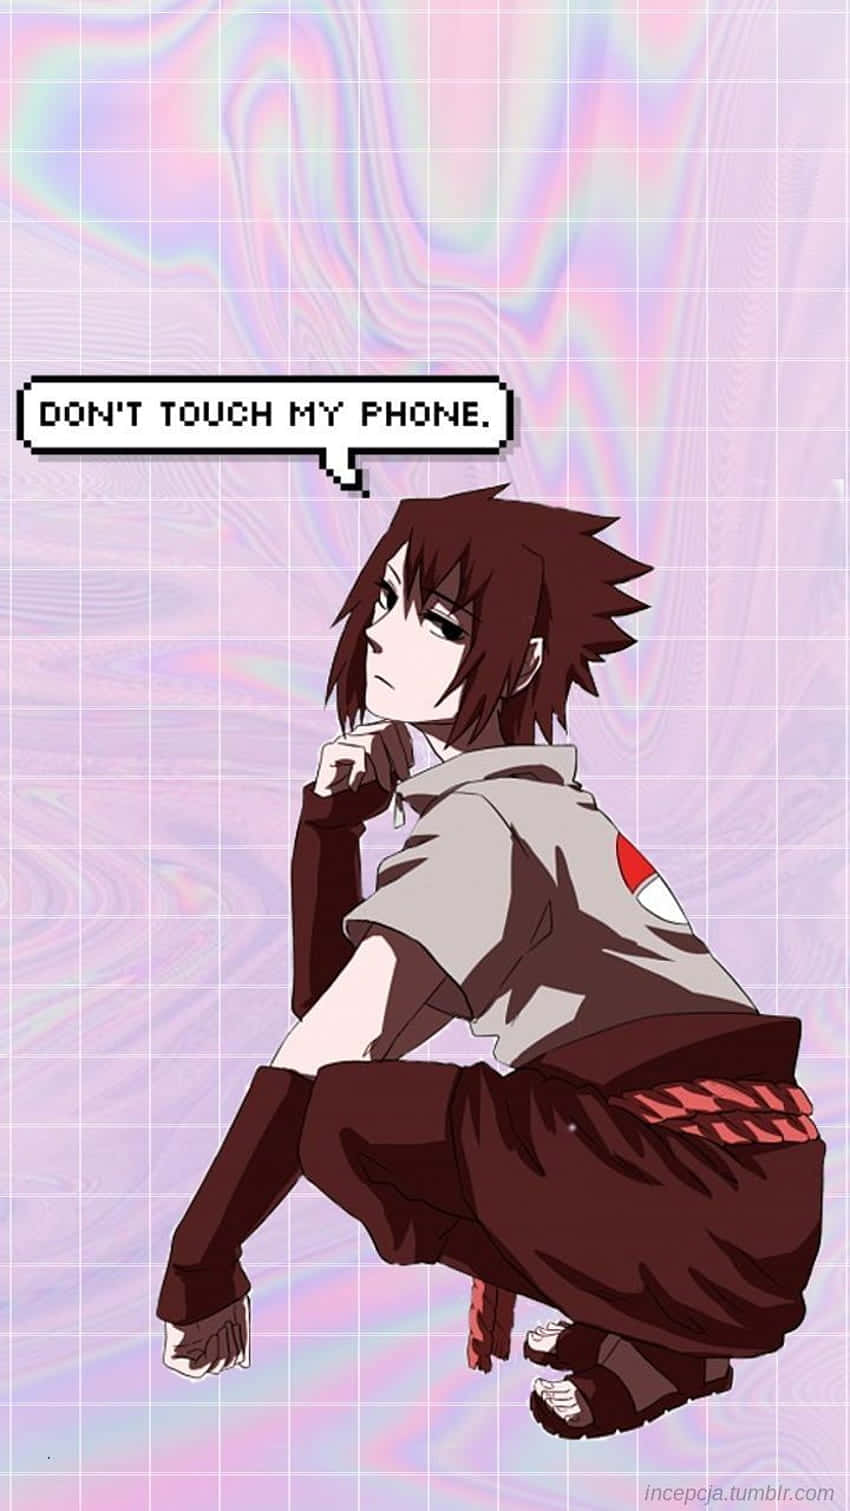 Keep your hands off my phone! Wallpaper